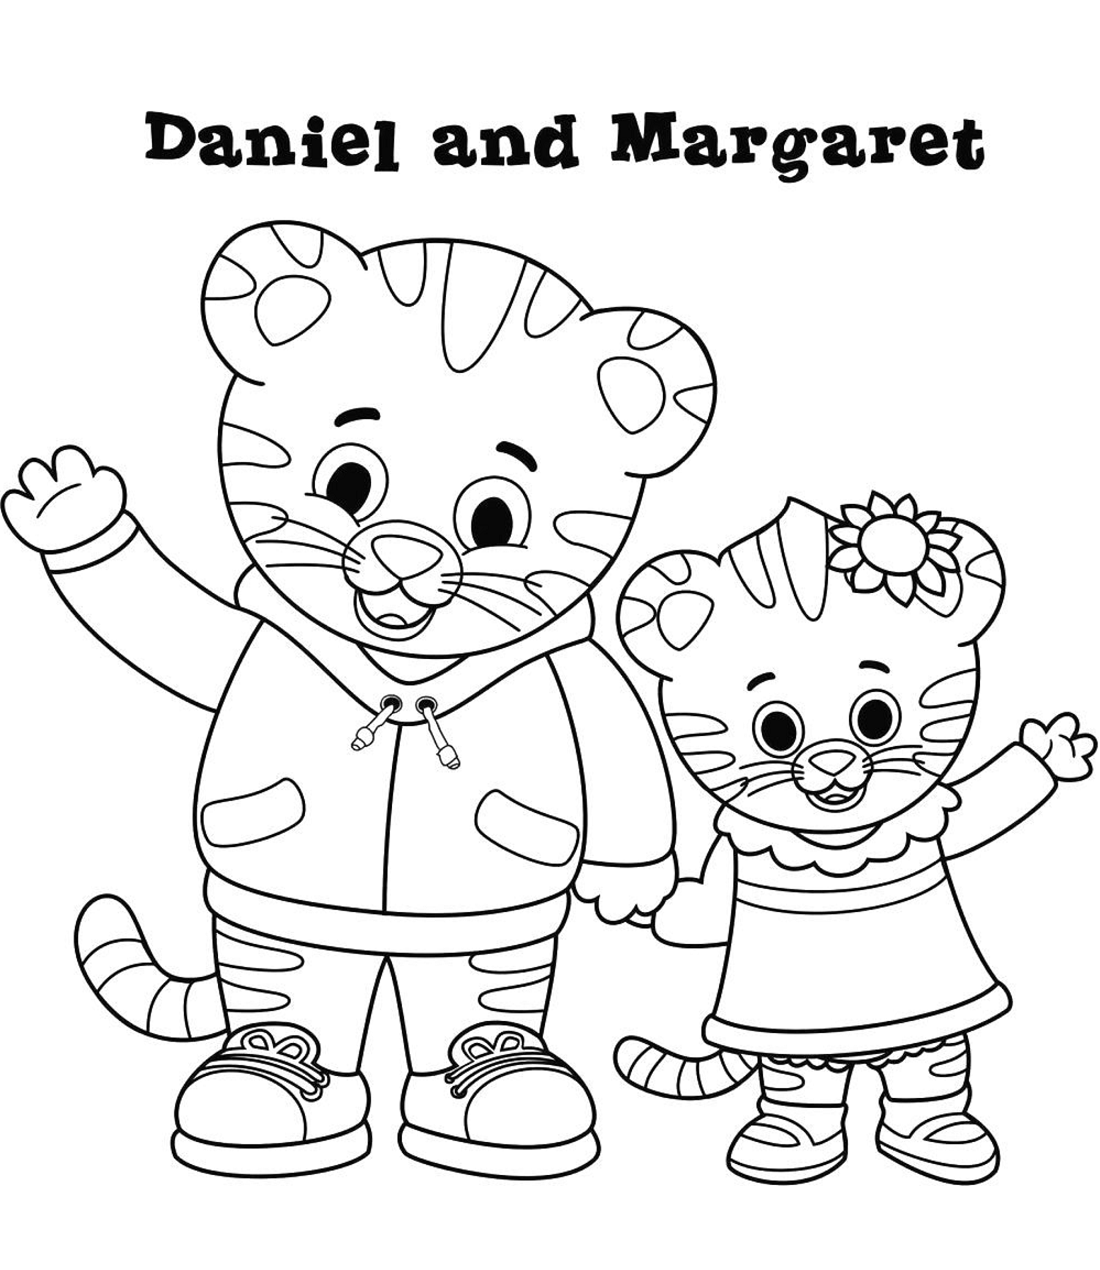 Daniel And Margaret Coloring Page - Free Printable Coloring Pages for Kids